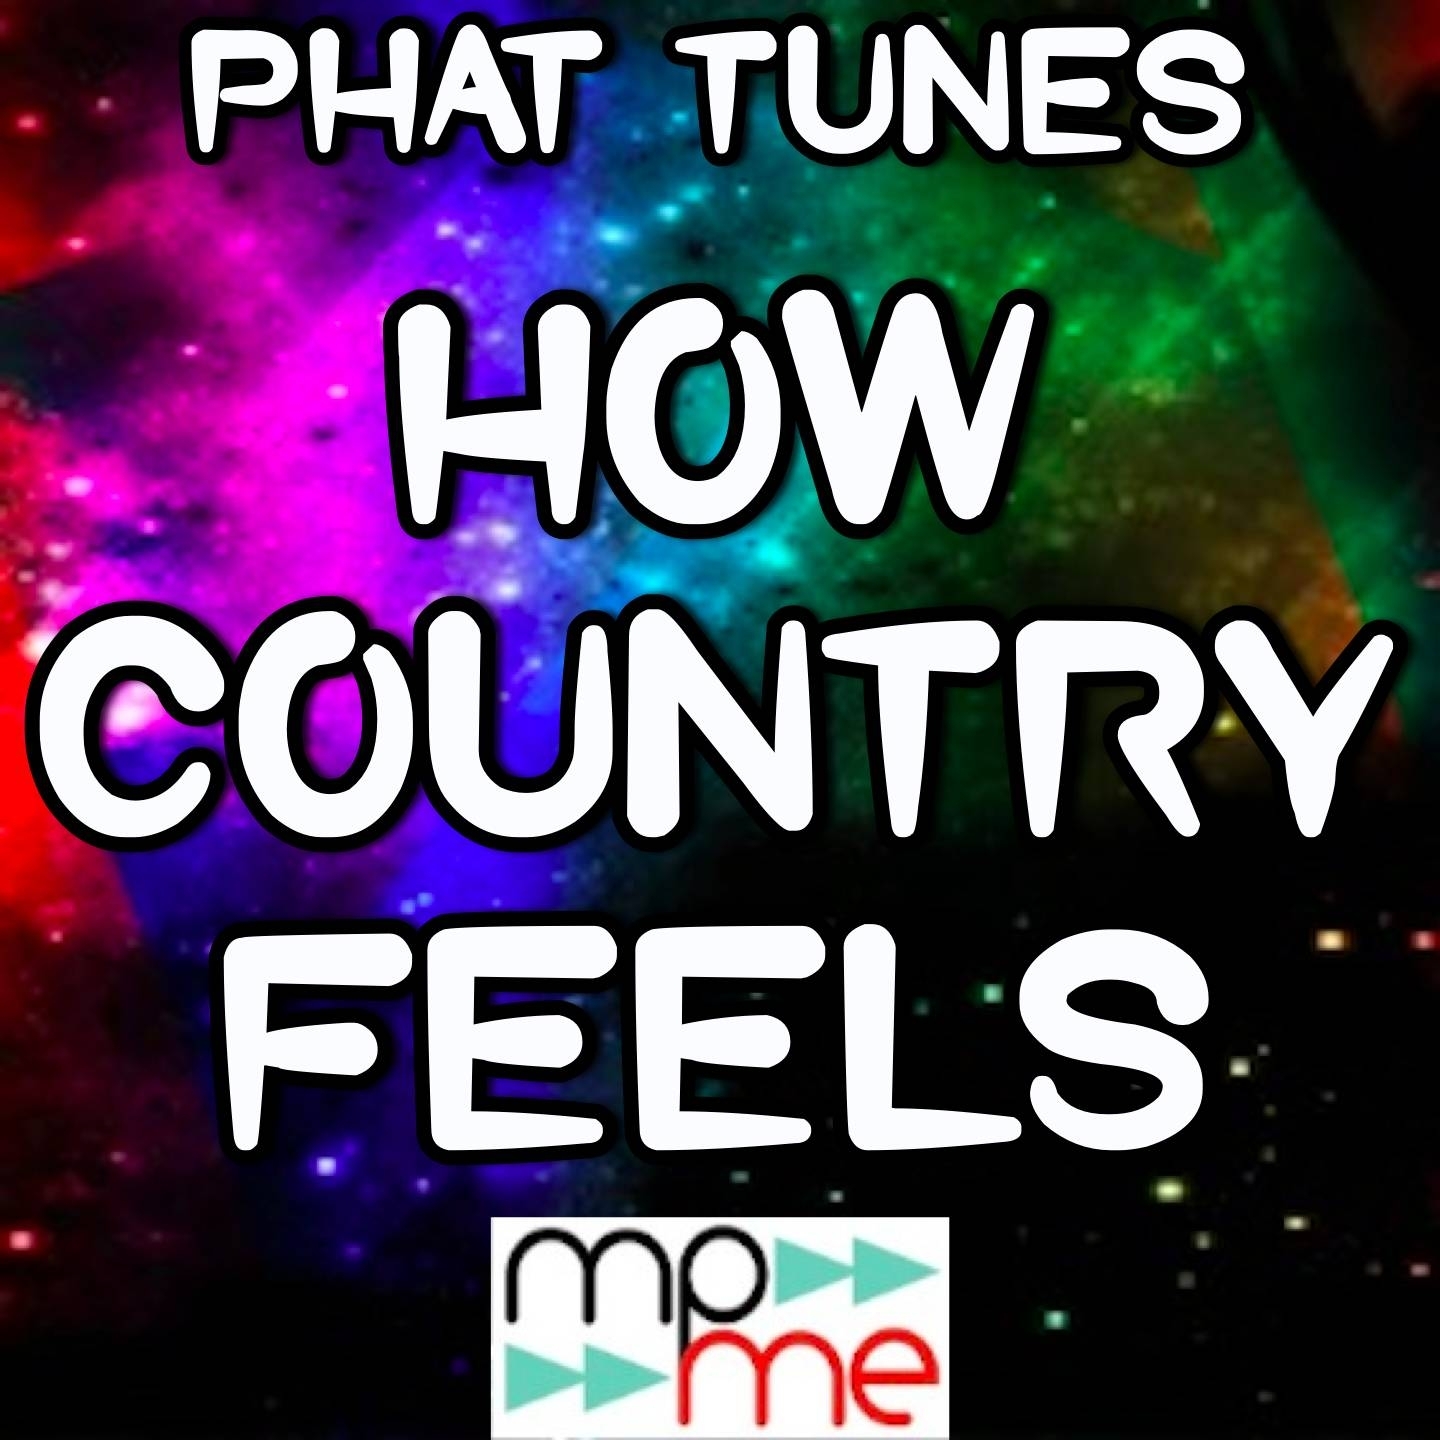 How Country Feels